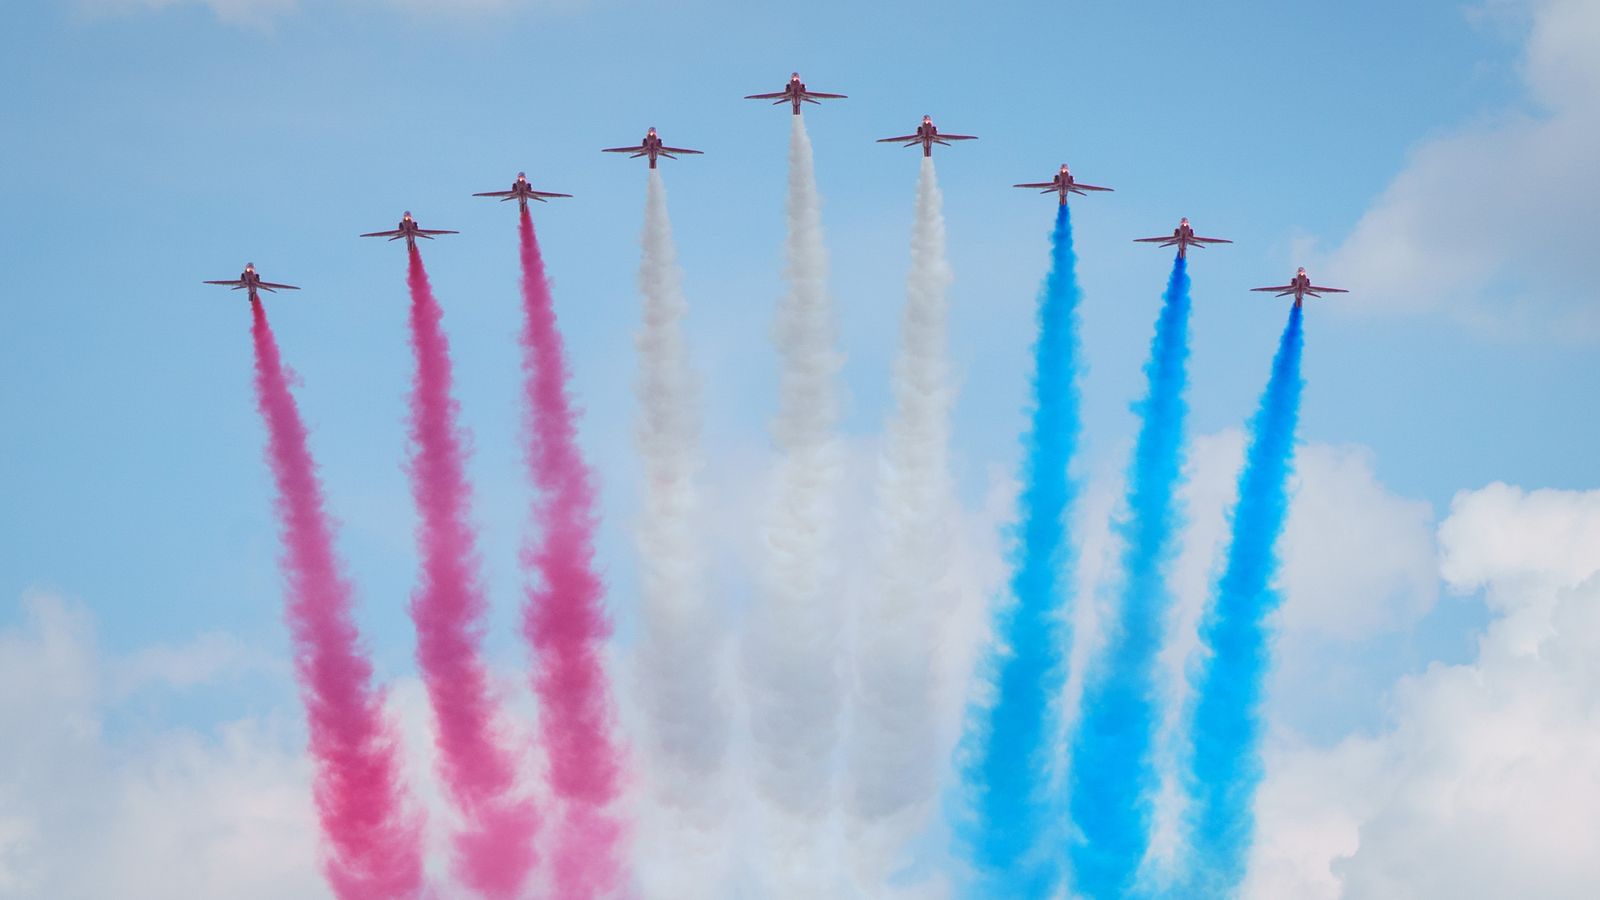 RAF sacks some personnel after claims of 'unacceptable behaviours' from members of Red Arrows | UK | Sky News